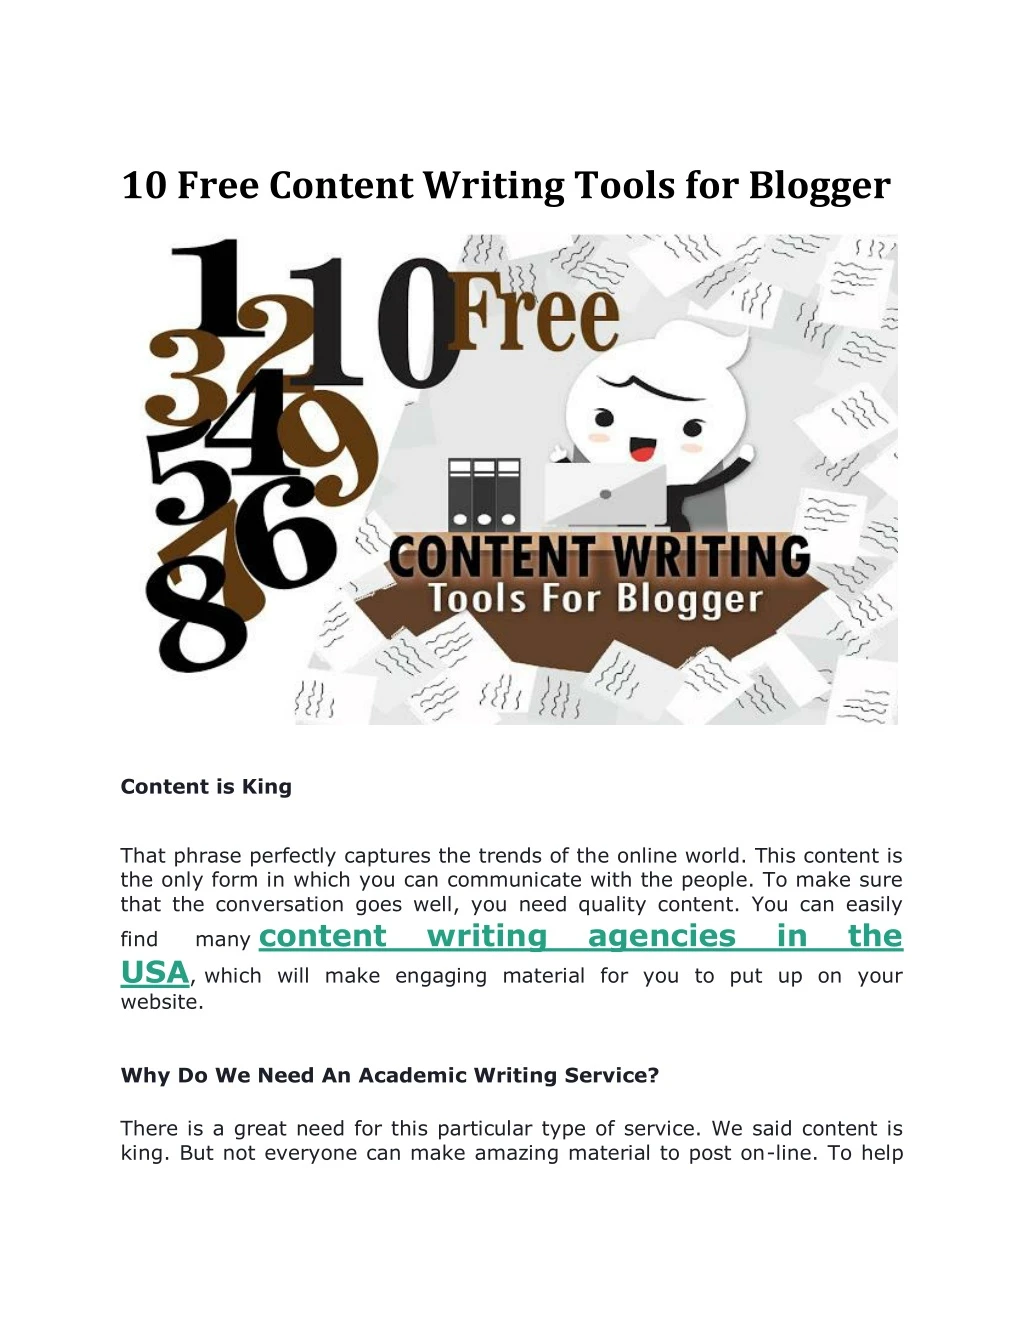 10 free content writing tools for blogger